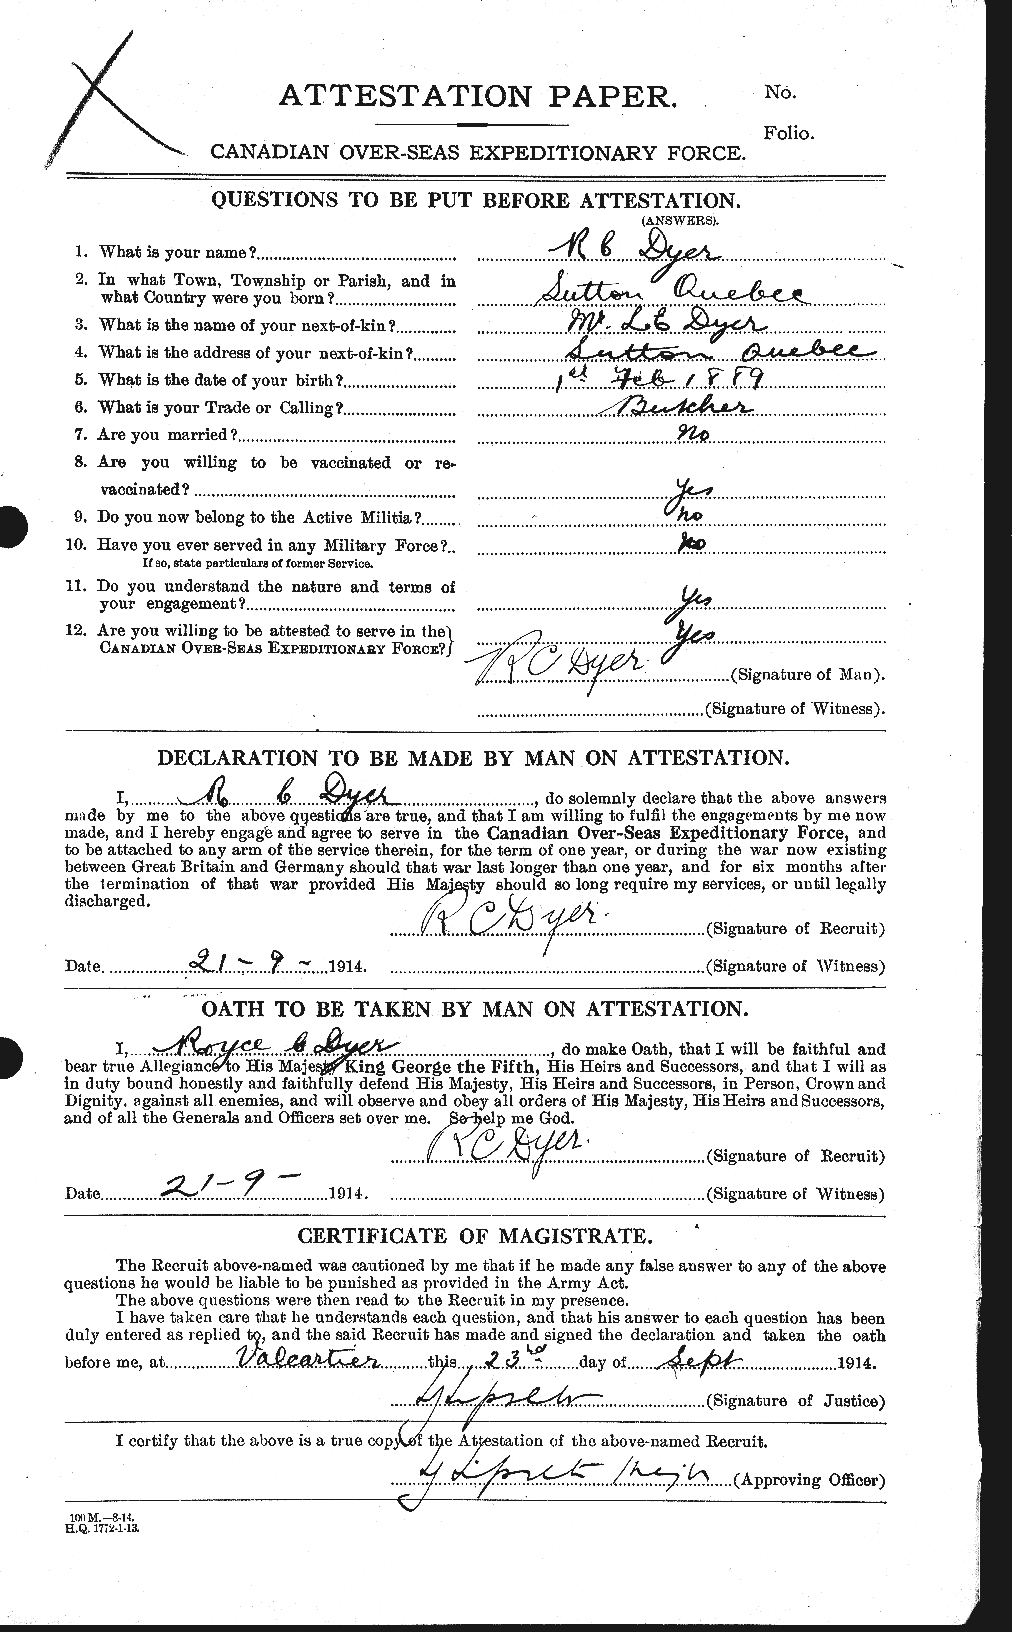 Personnel Records of the First World War - CEF 305857a